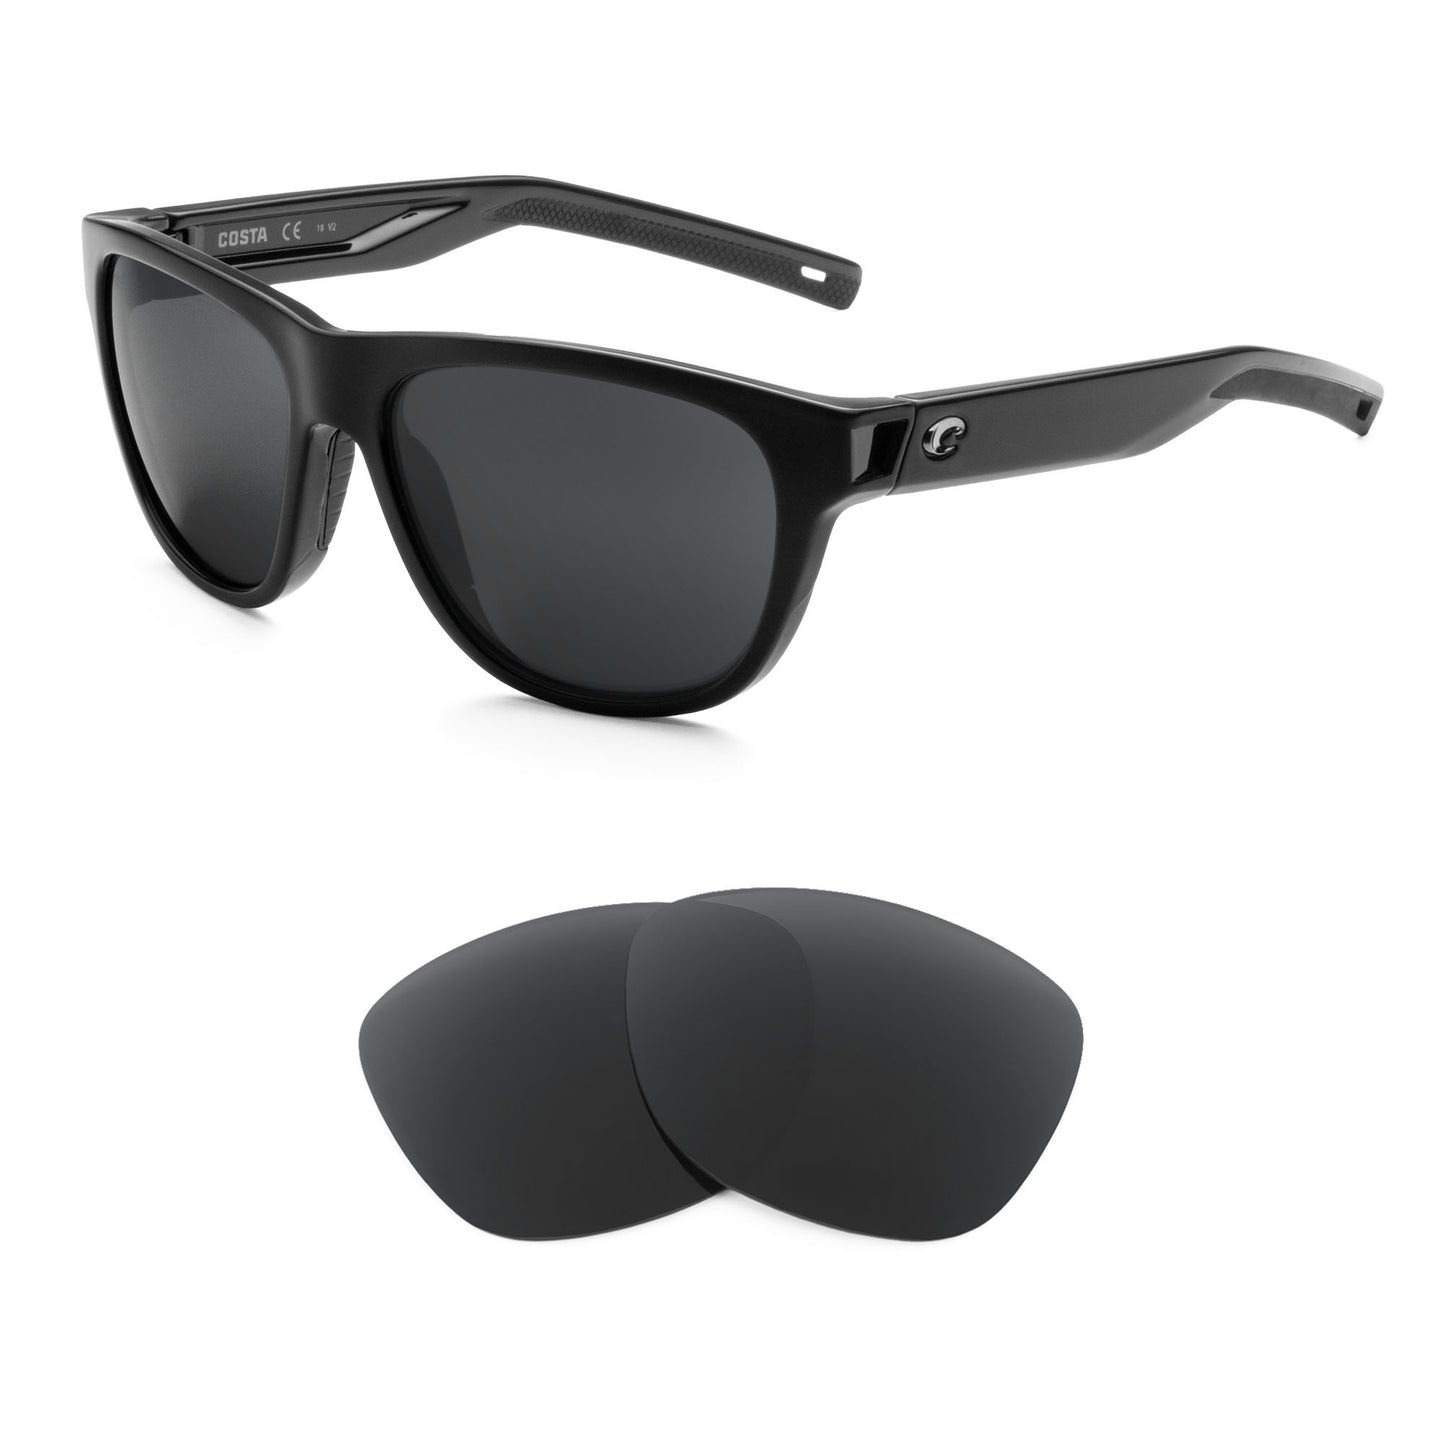 Costa Bayside sunglasses with replacement lenses